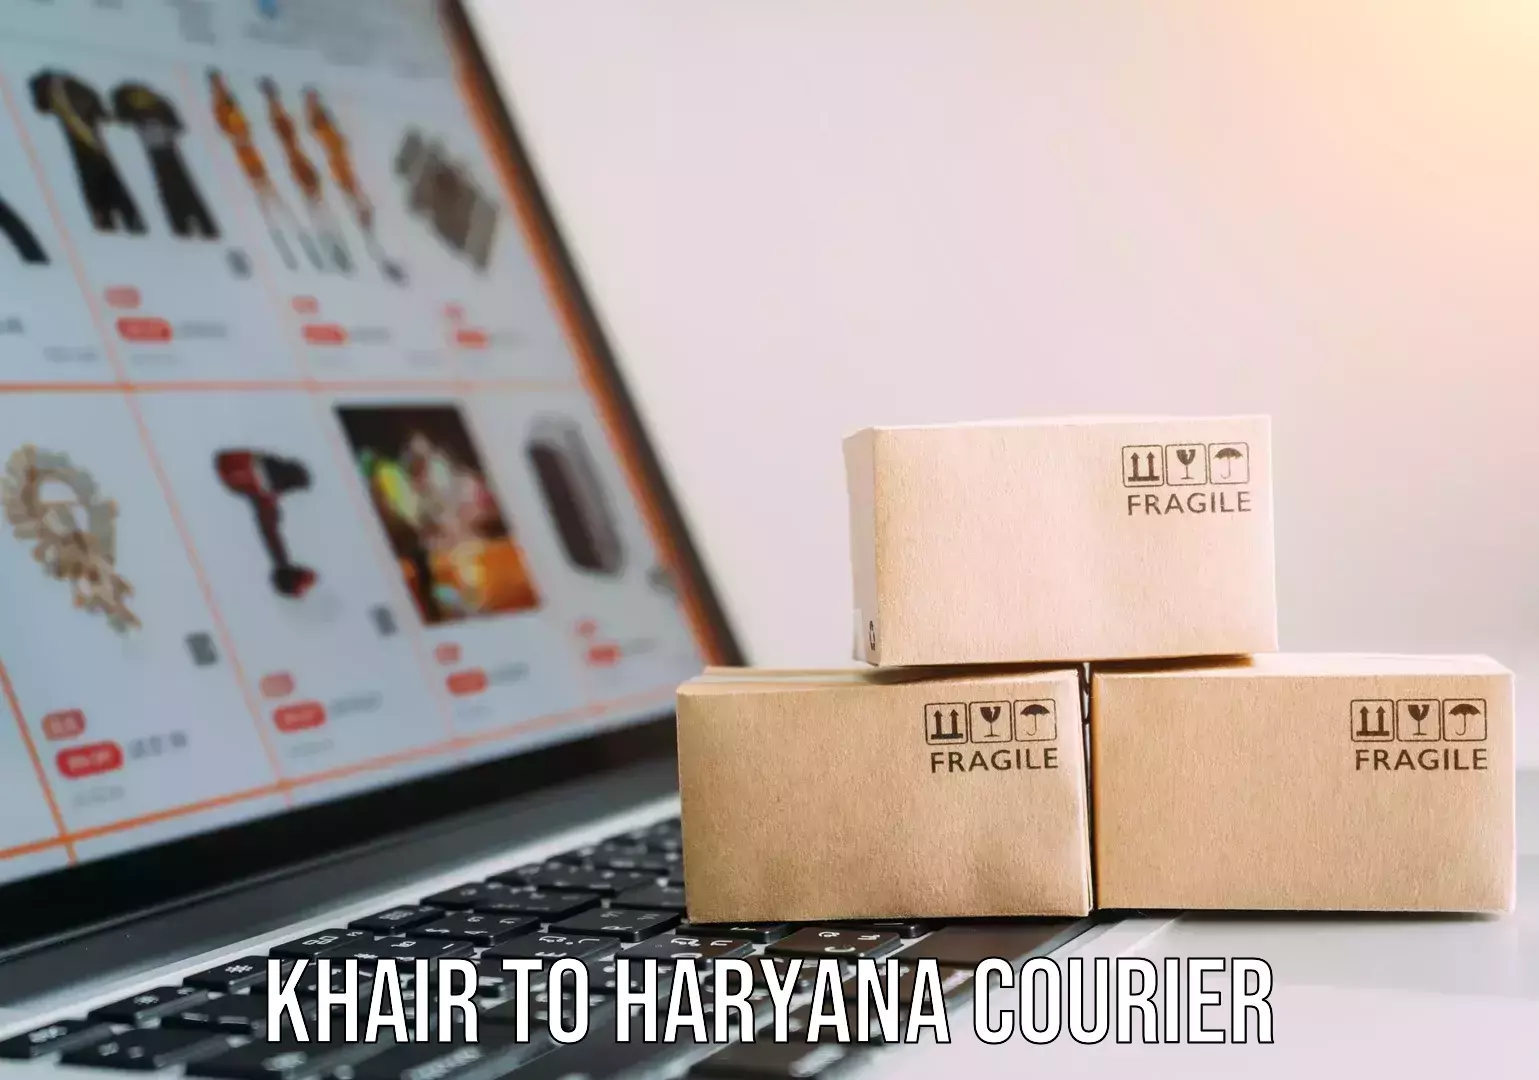 Trusted relocation experts Khair to Haryana